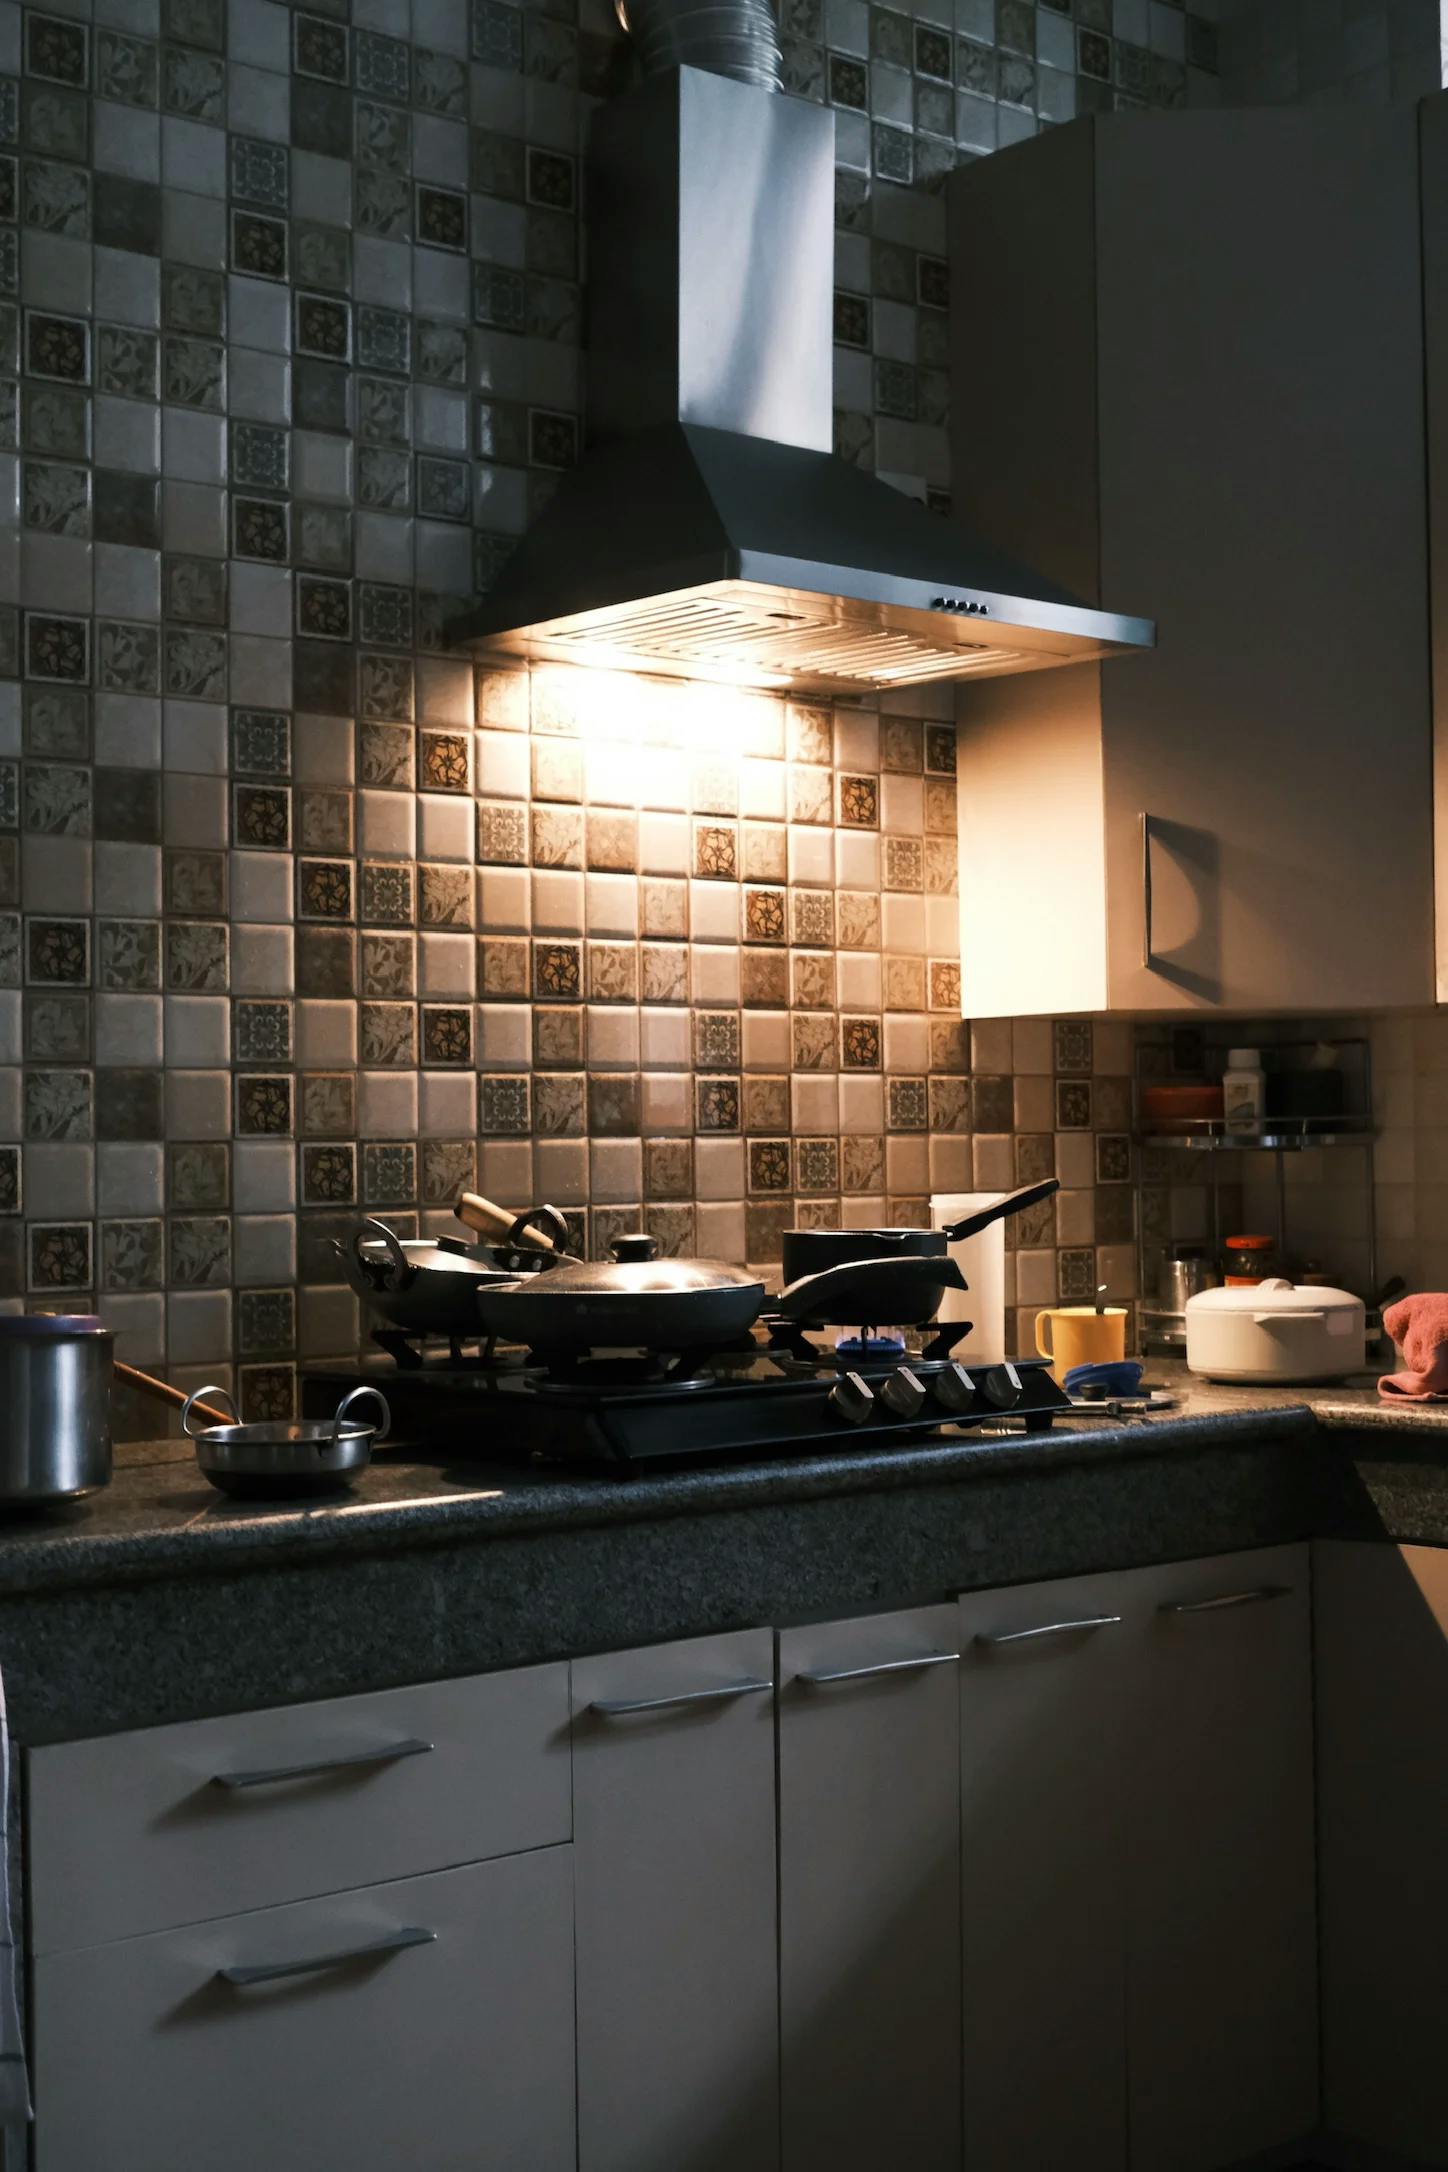 A stovetop with warm light coming from the exhaust.